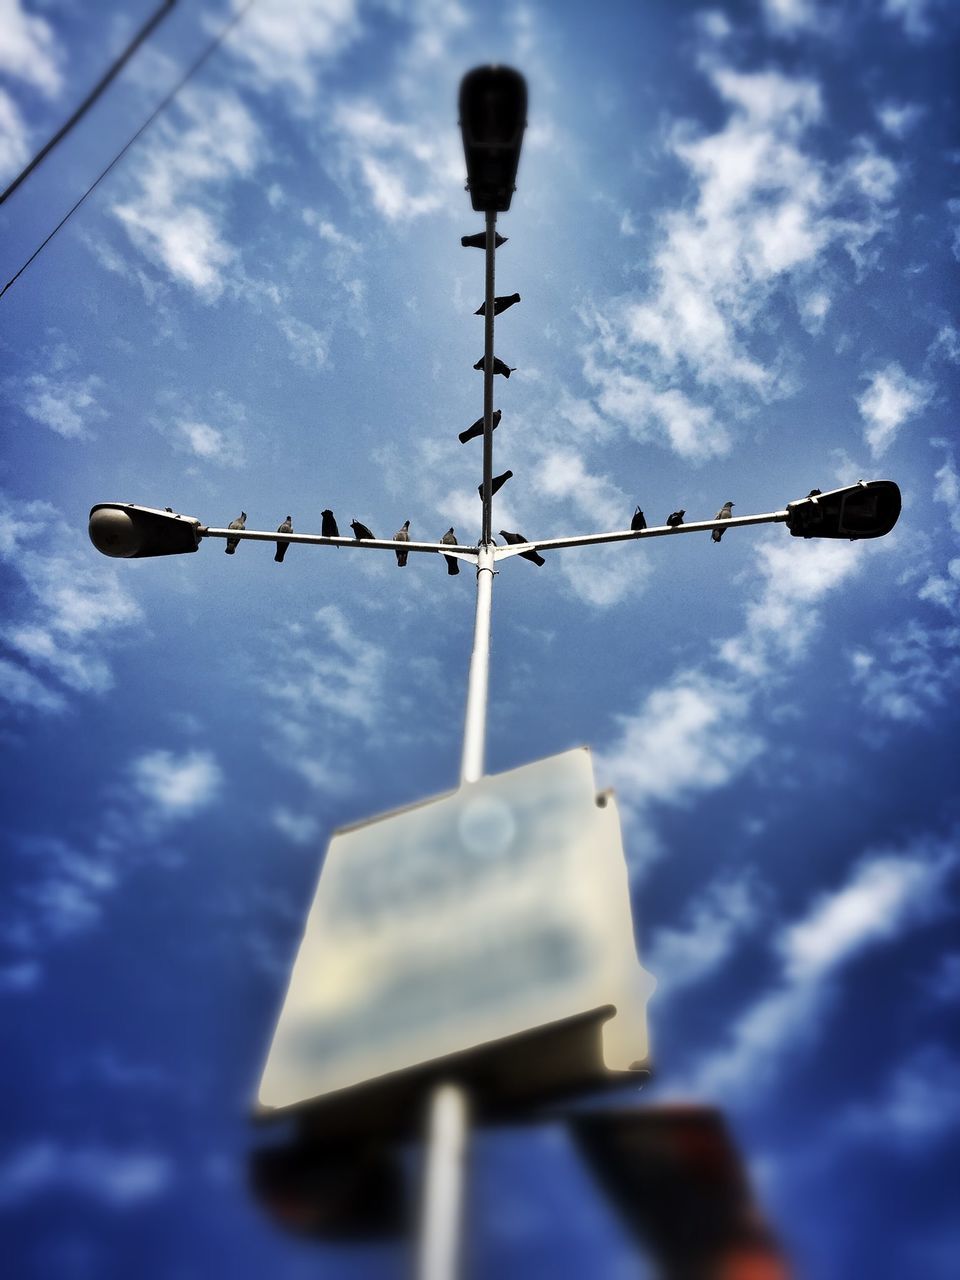 low angle view, sky, communication, lighting equipment, text, cloud - sky, hanging, street light, guidance, cloudy, western script, cloud, blue, road signal, pole, no people, outdoors, metal, technology, safety